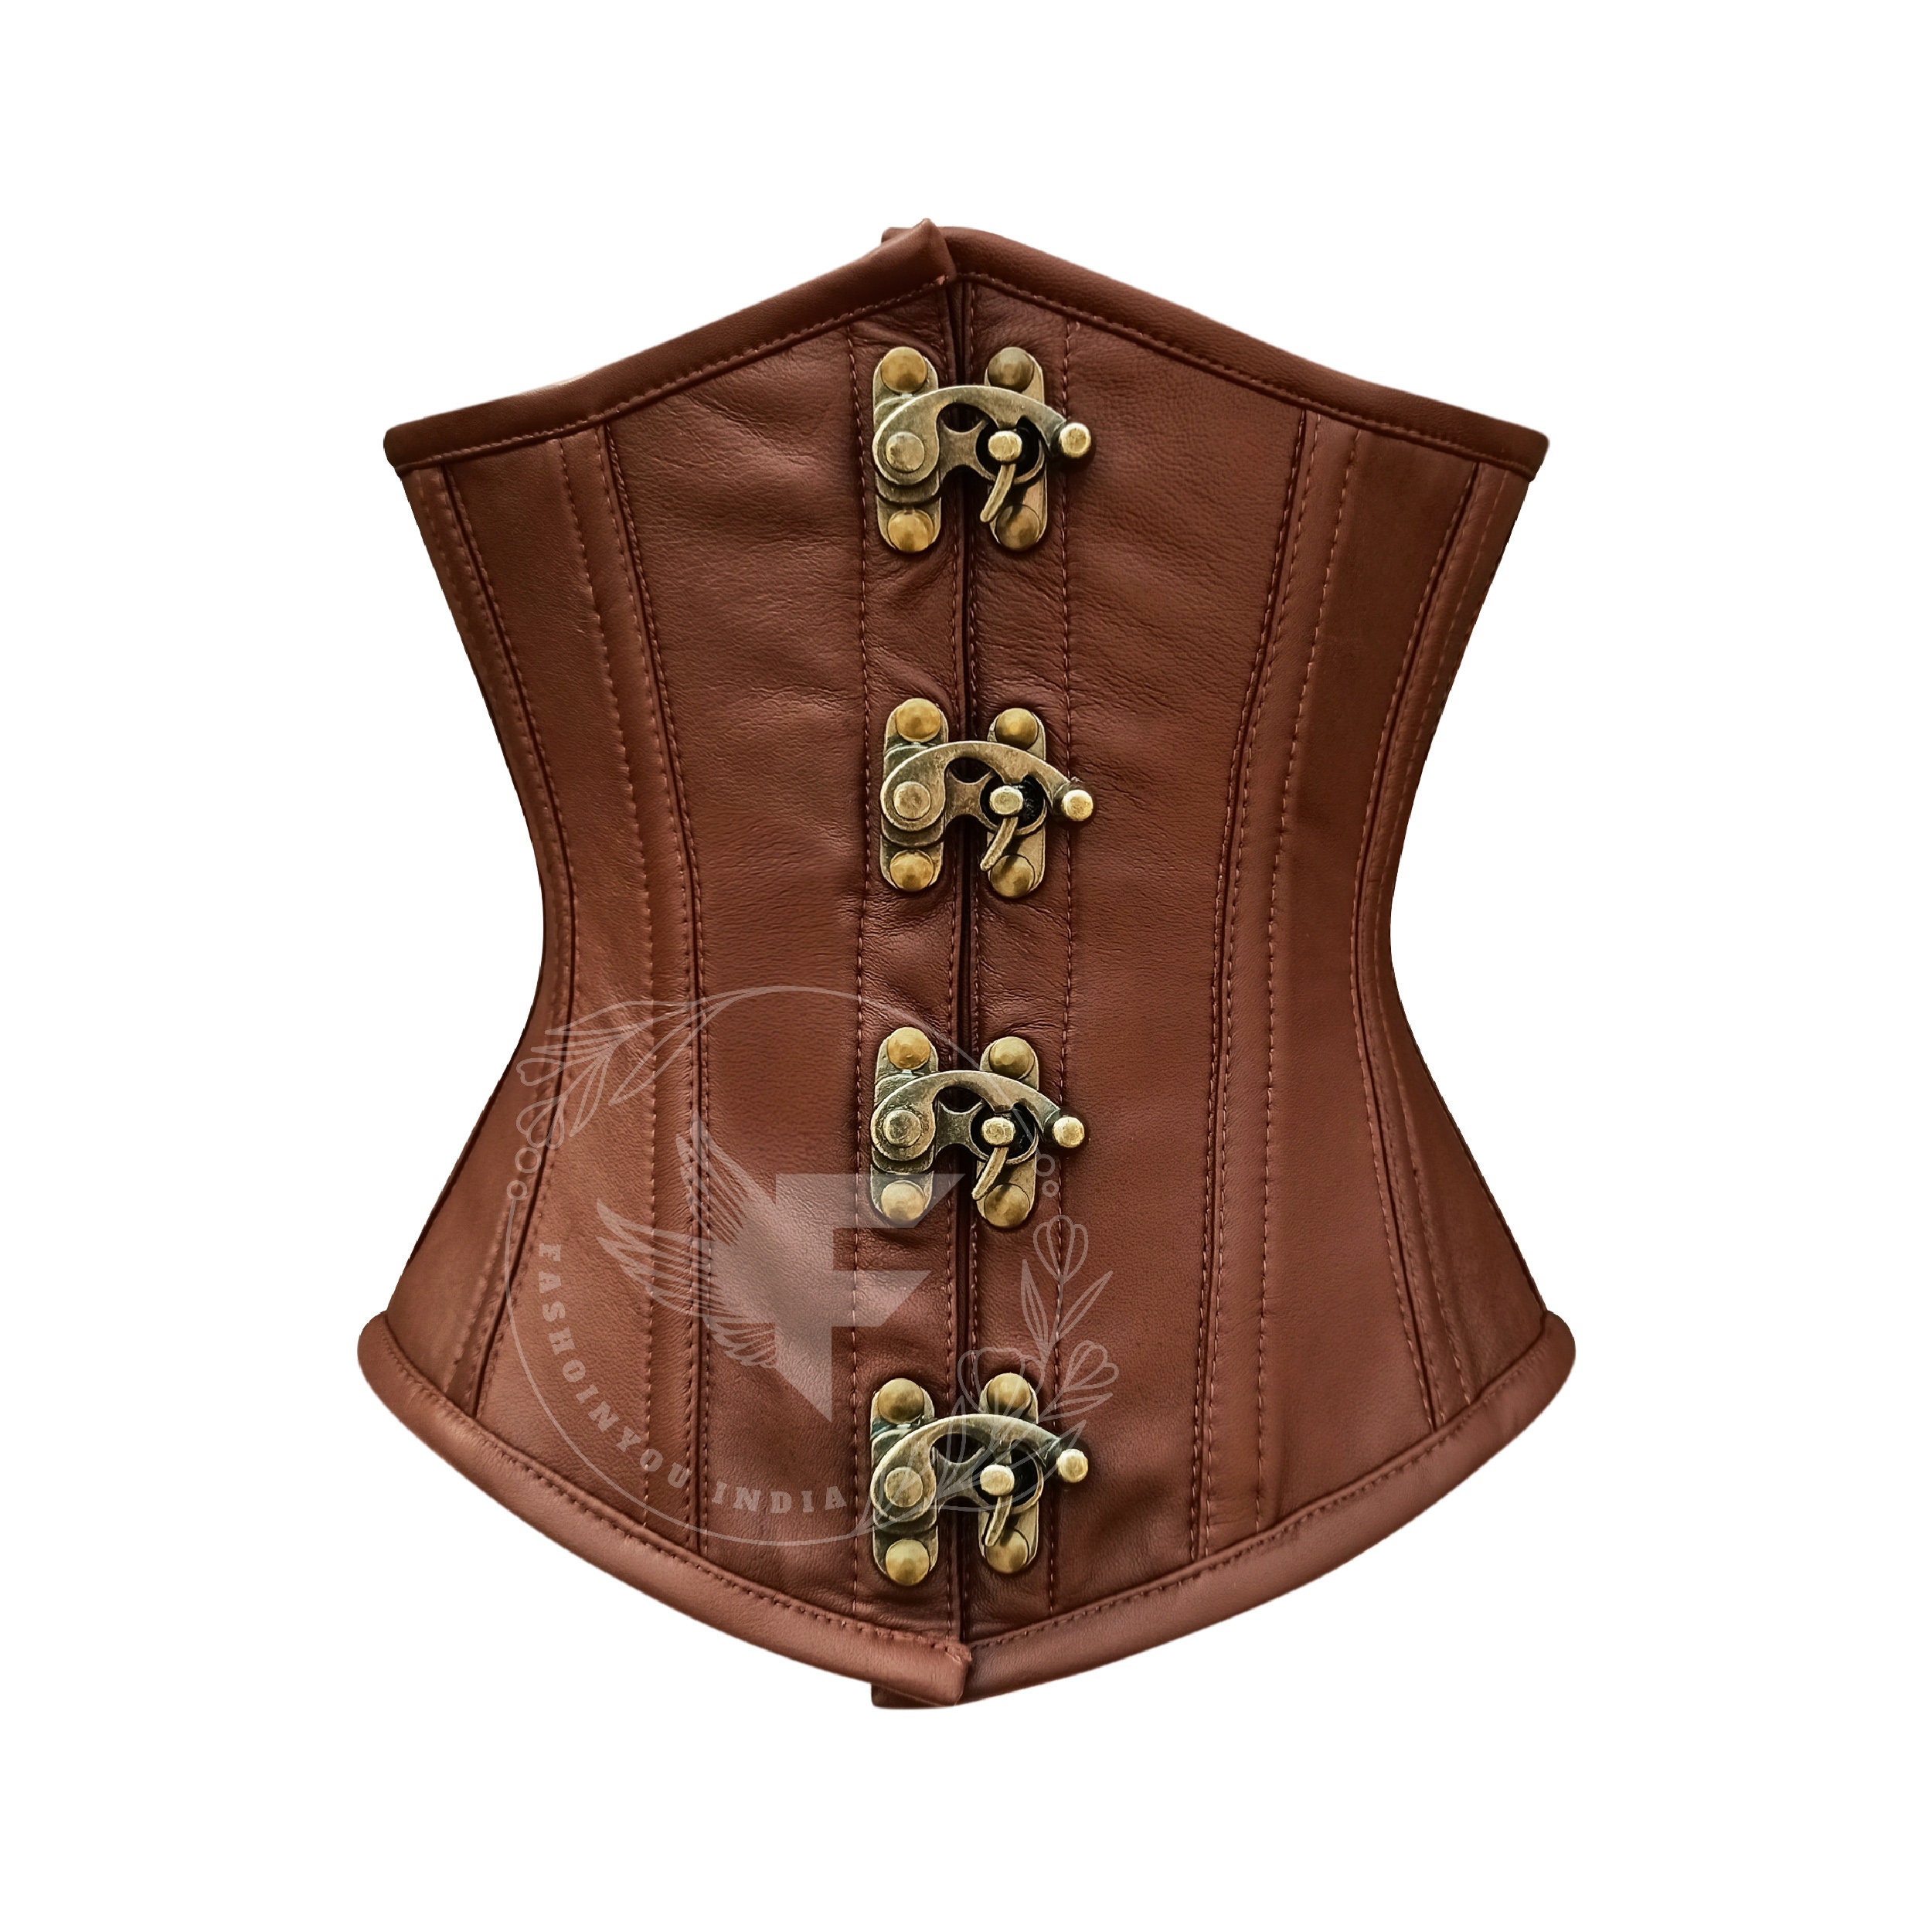 Amaryllis Heavy Duty Waist Trainer Steel Boned Leather Corset in Brown  Steampunk Corset for Dress Leather Corset Belt in Plus Size 